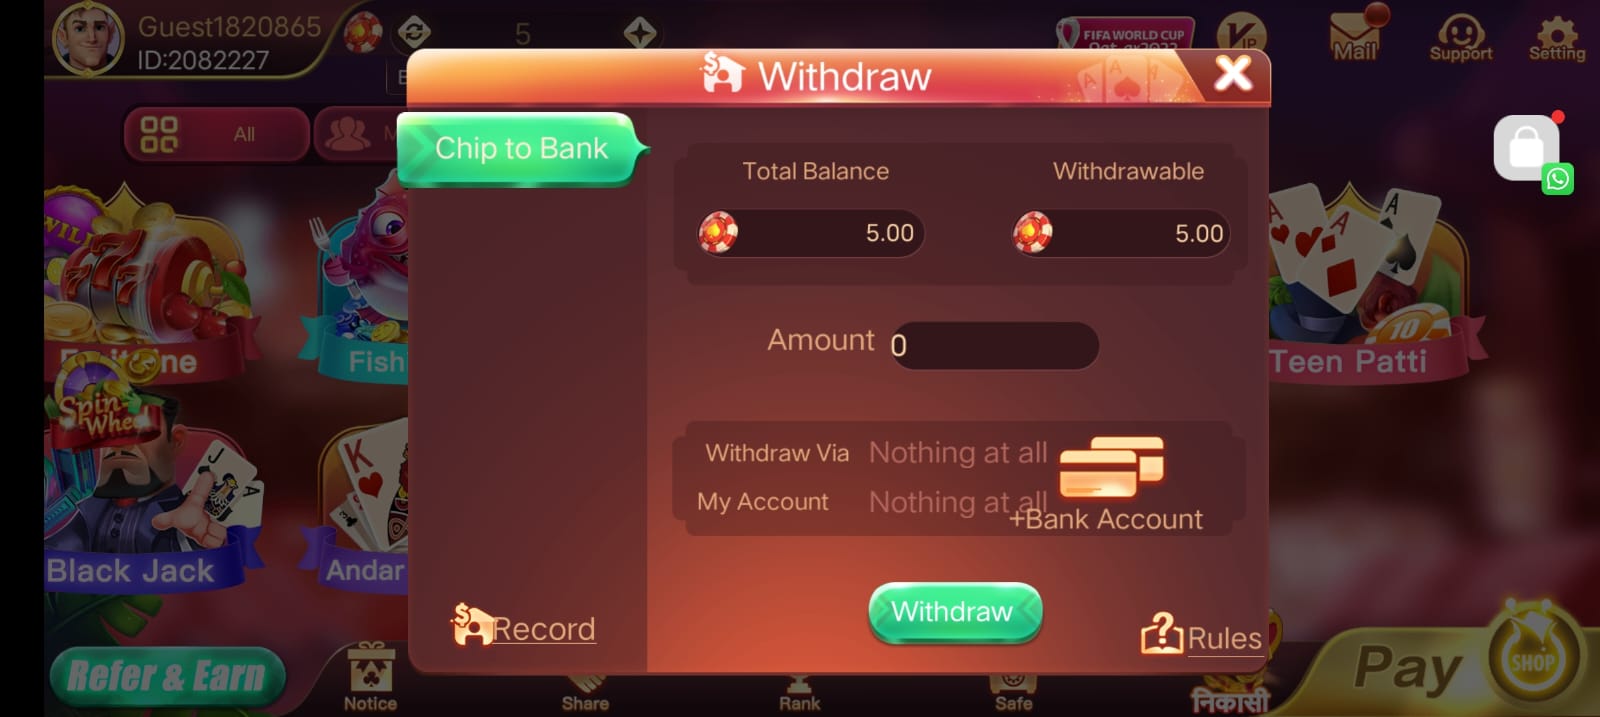 Withdrawal Money In Rummy Cash Application